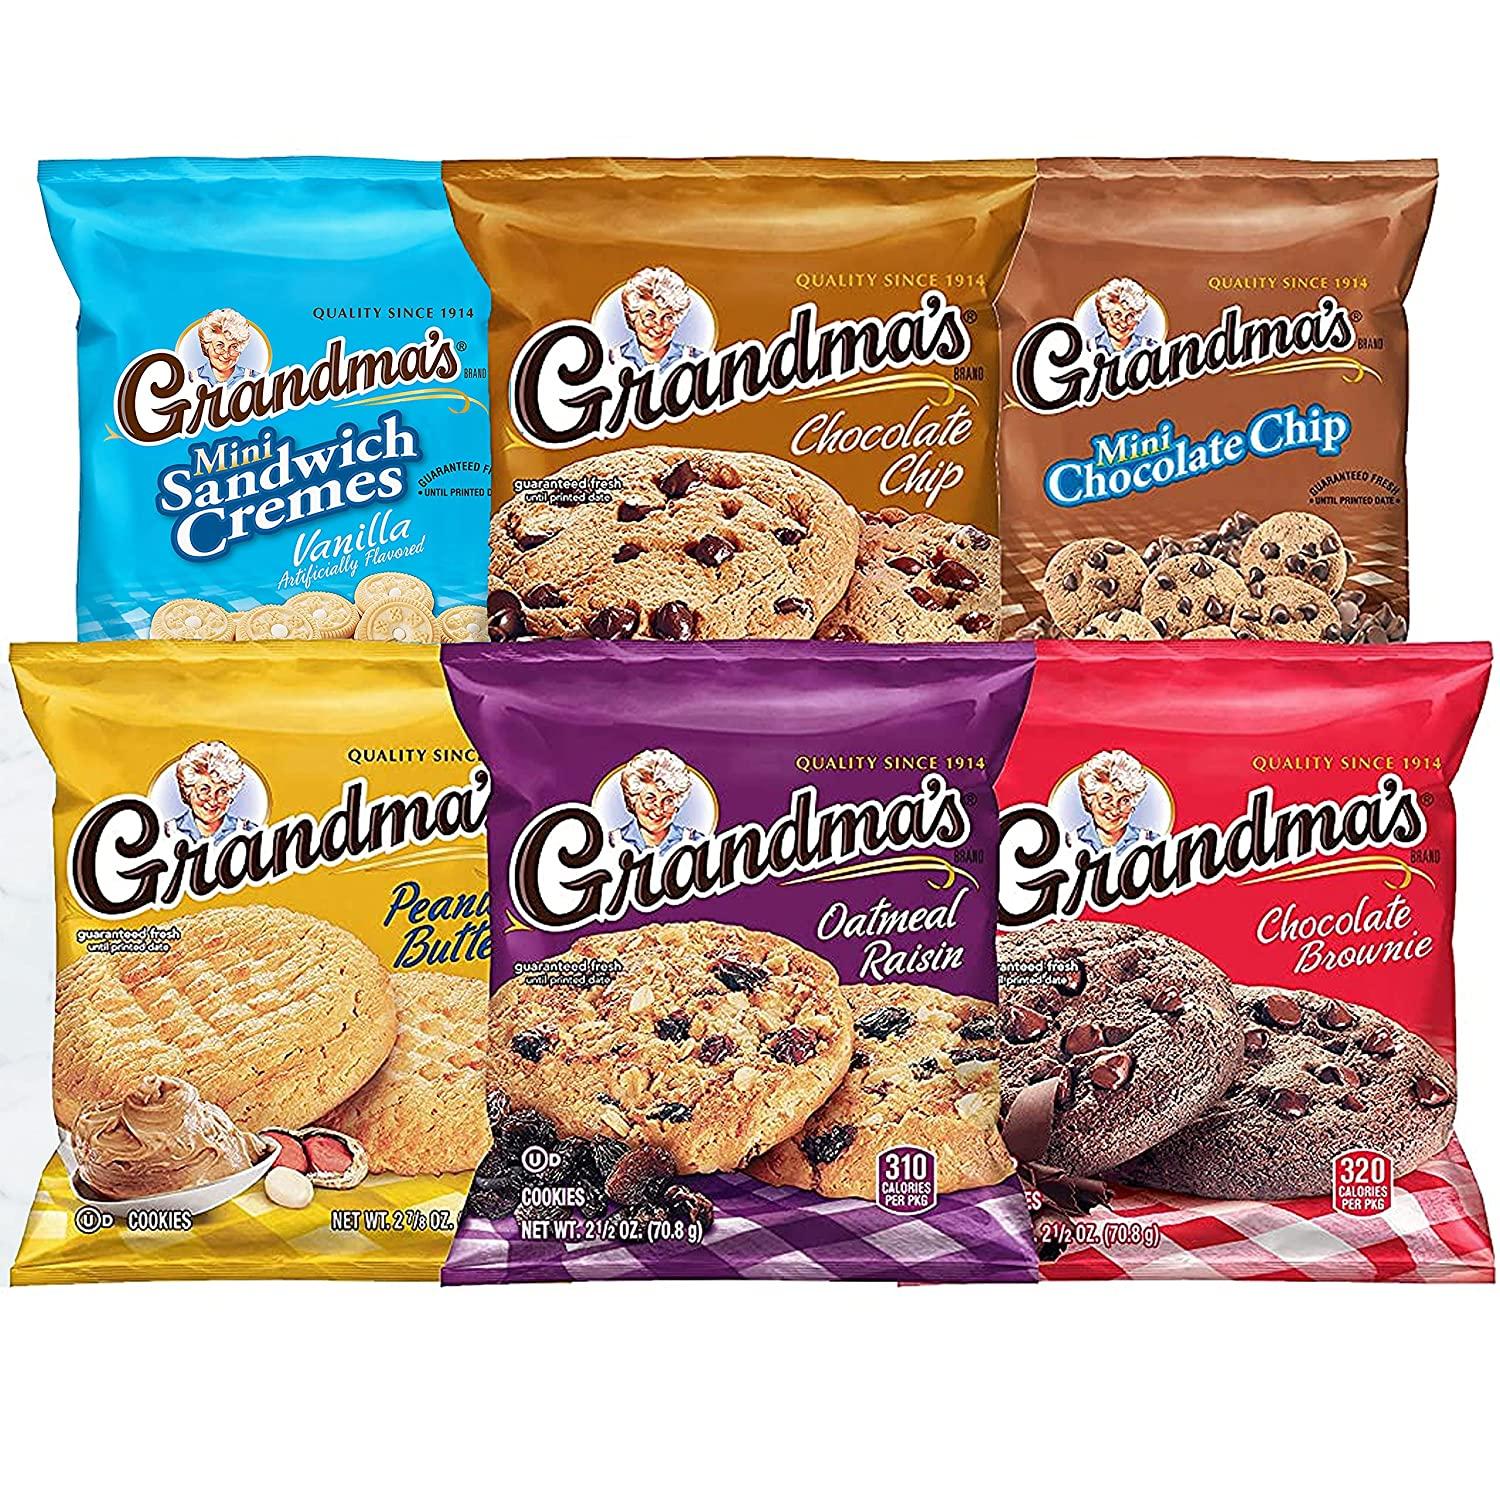 Grandma's Cookies Variety Pack of 30 for $8.55 Shipped